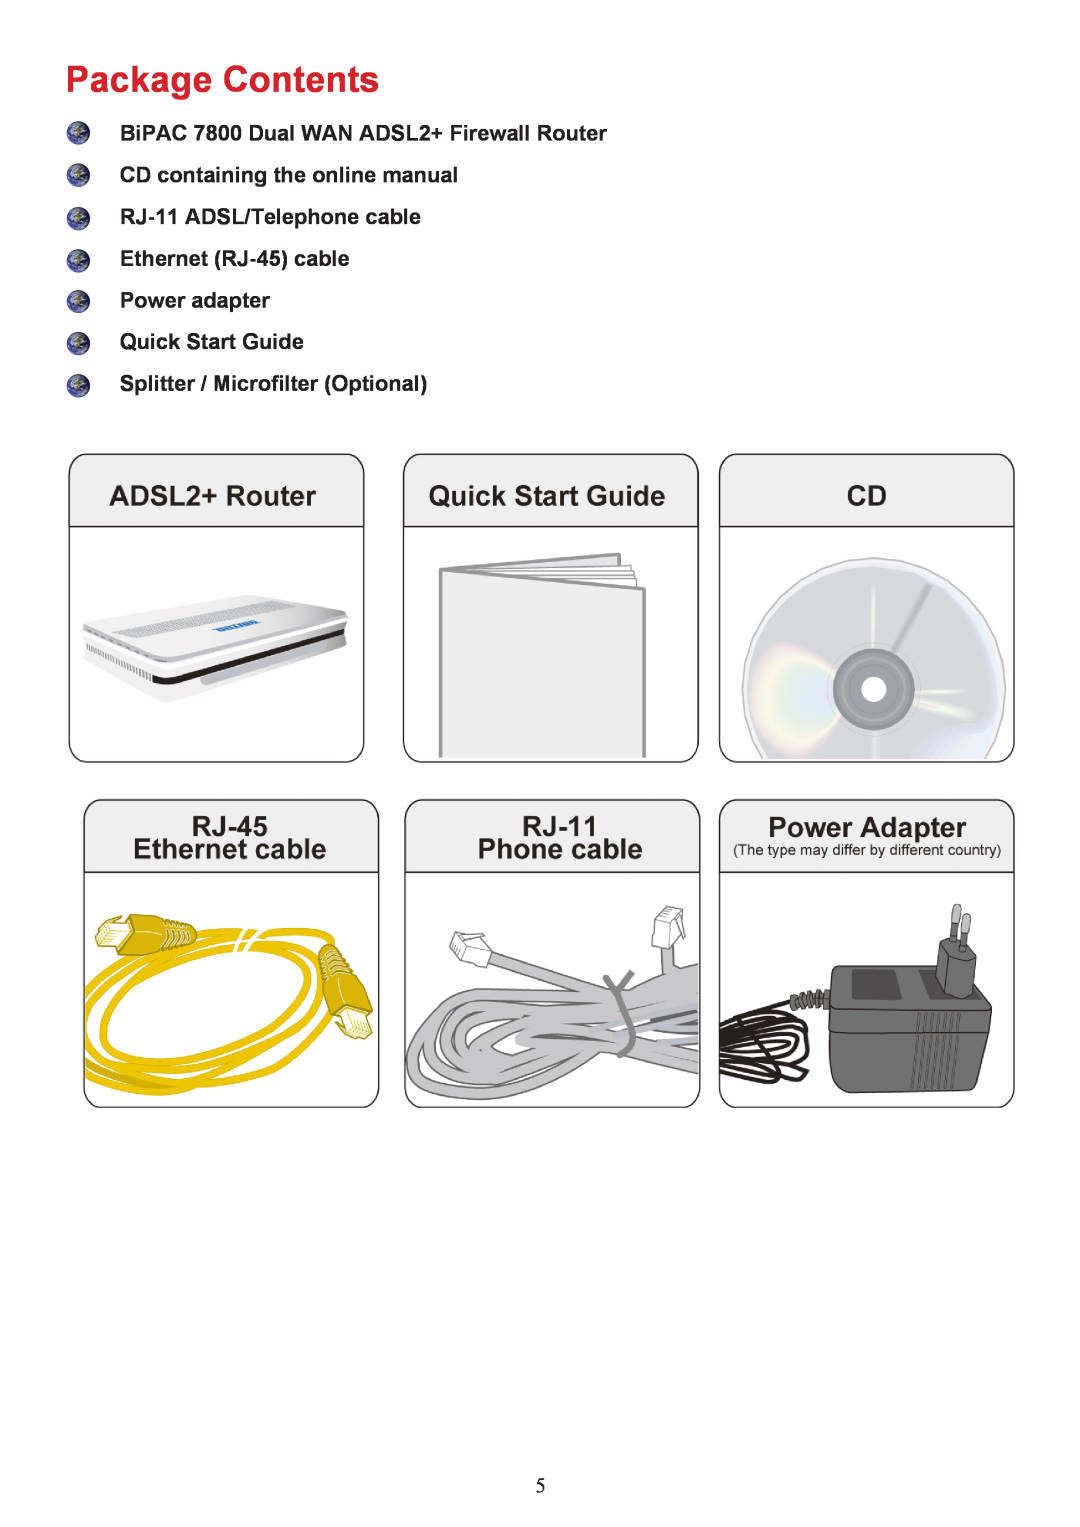 Billion Electric Company 7800 user manual Package Contents, RJ-11 ADSL/Telephone cable Ethernet RJ-45 cable Power adapter 